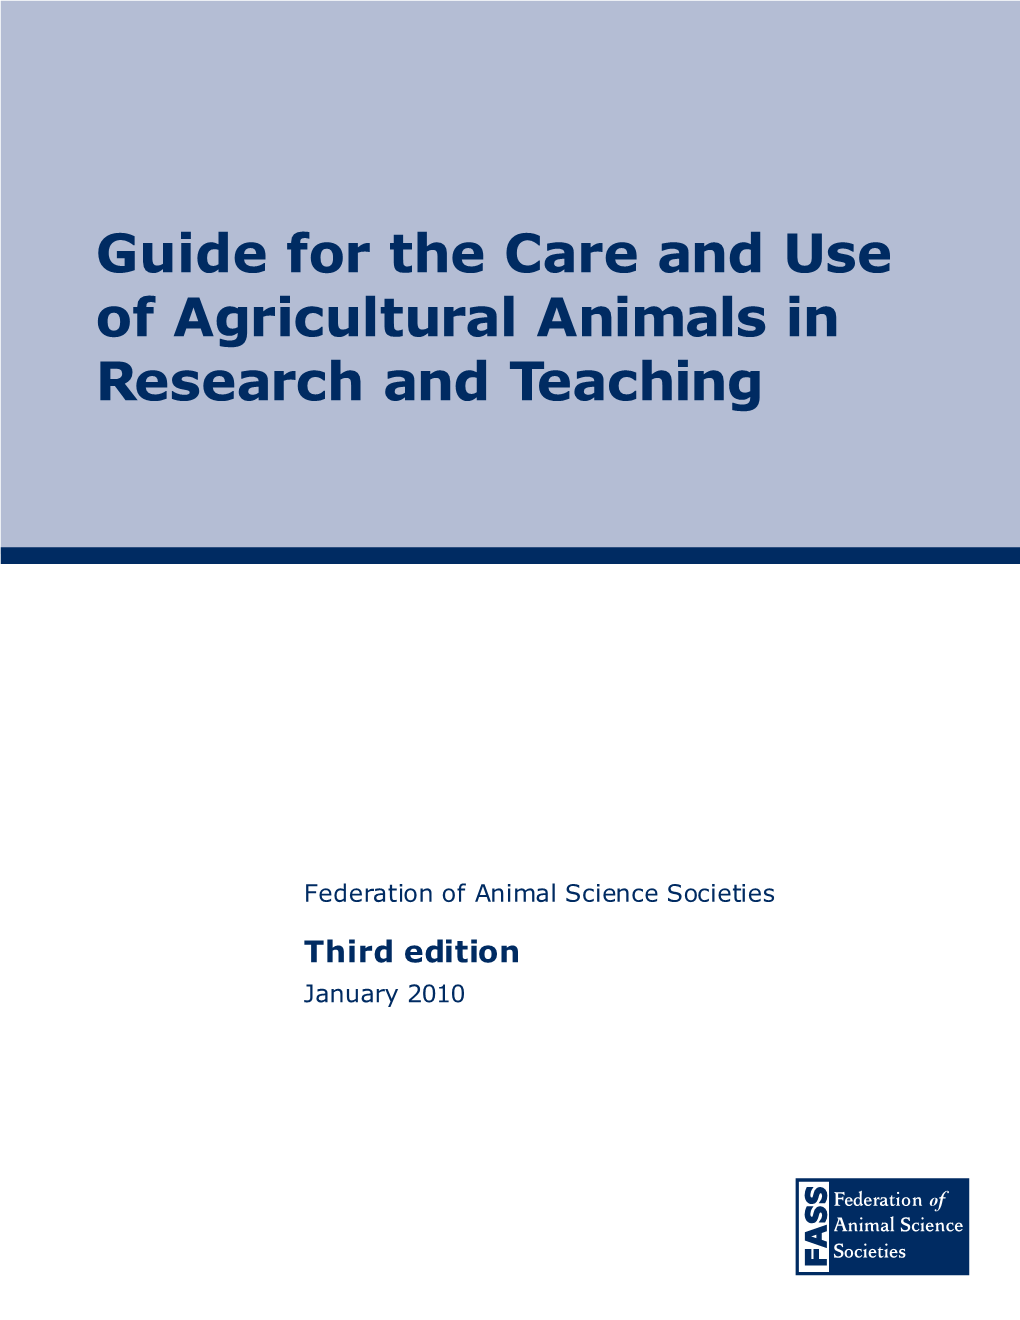 Guide for the Care and Use of Agricultural Animals in Research and Teaching